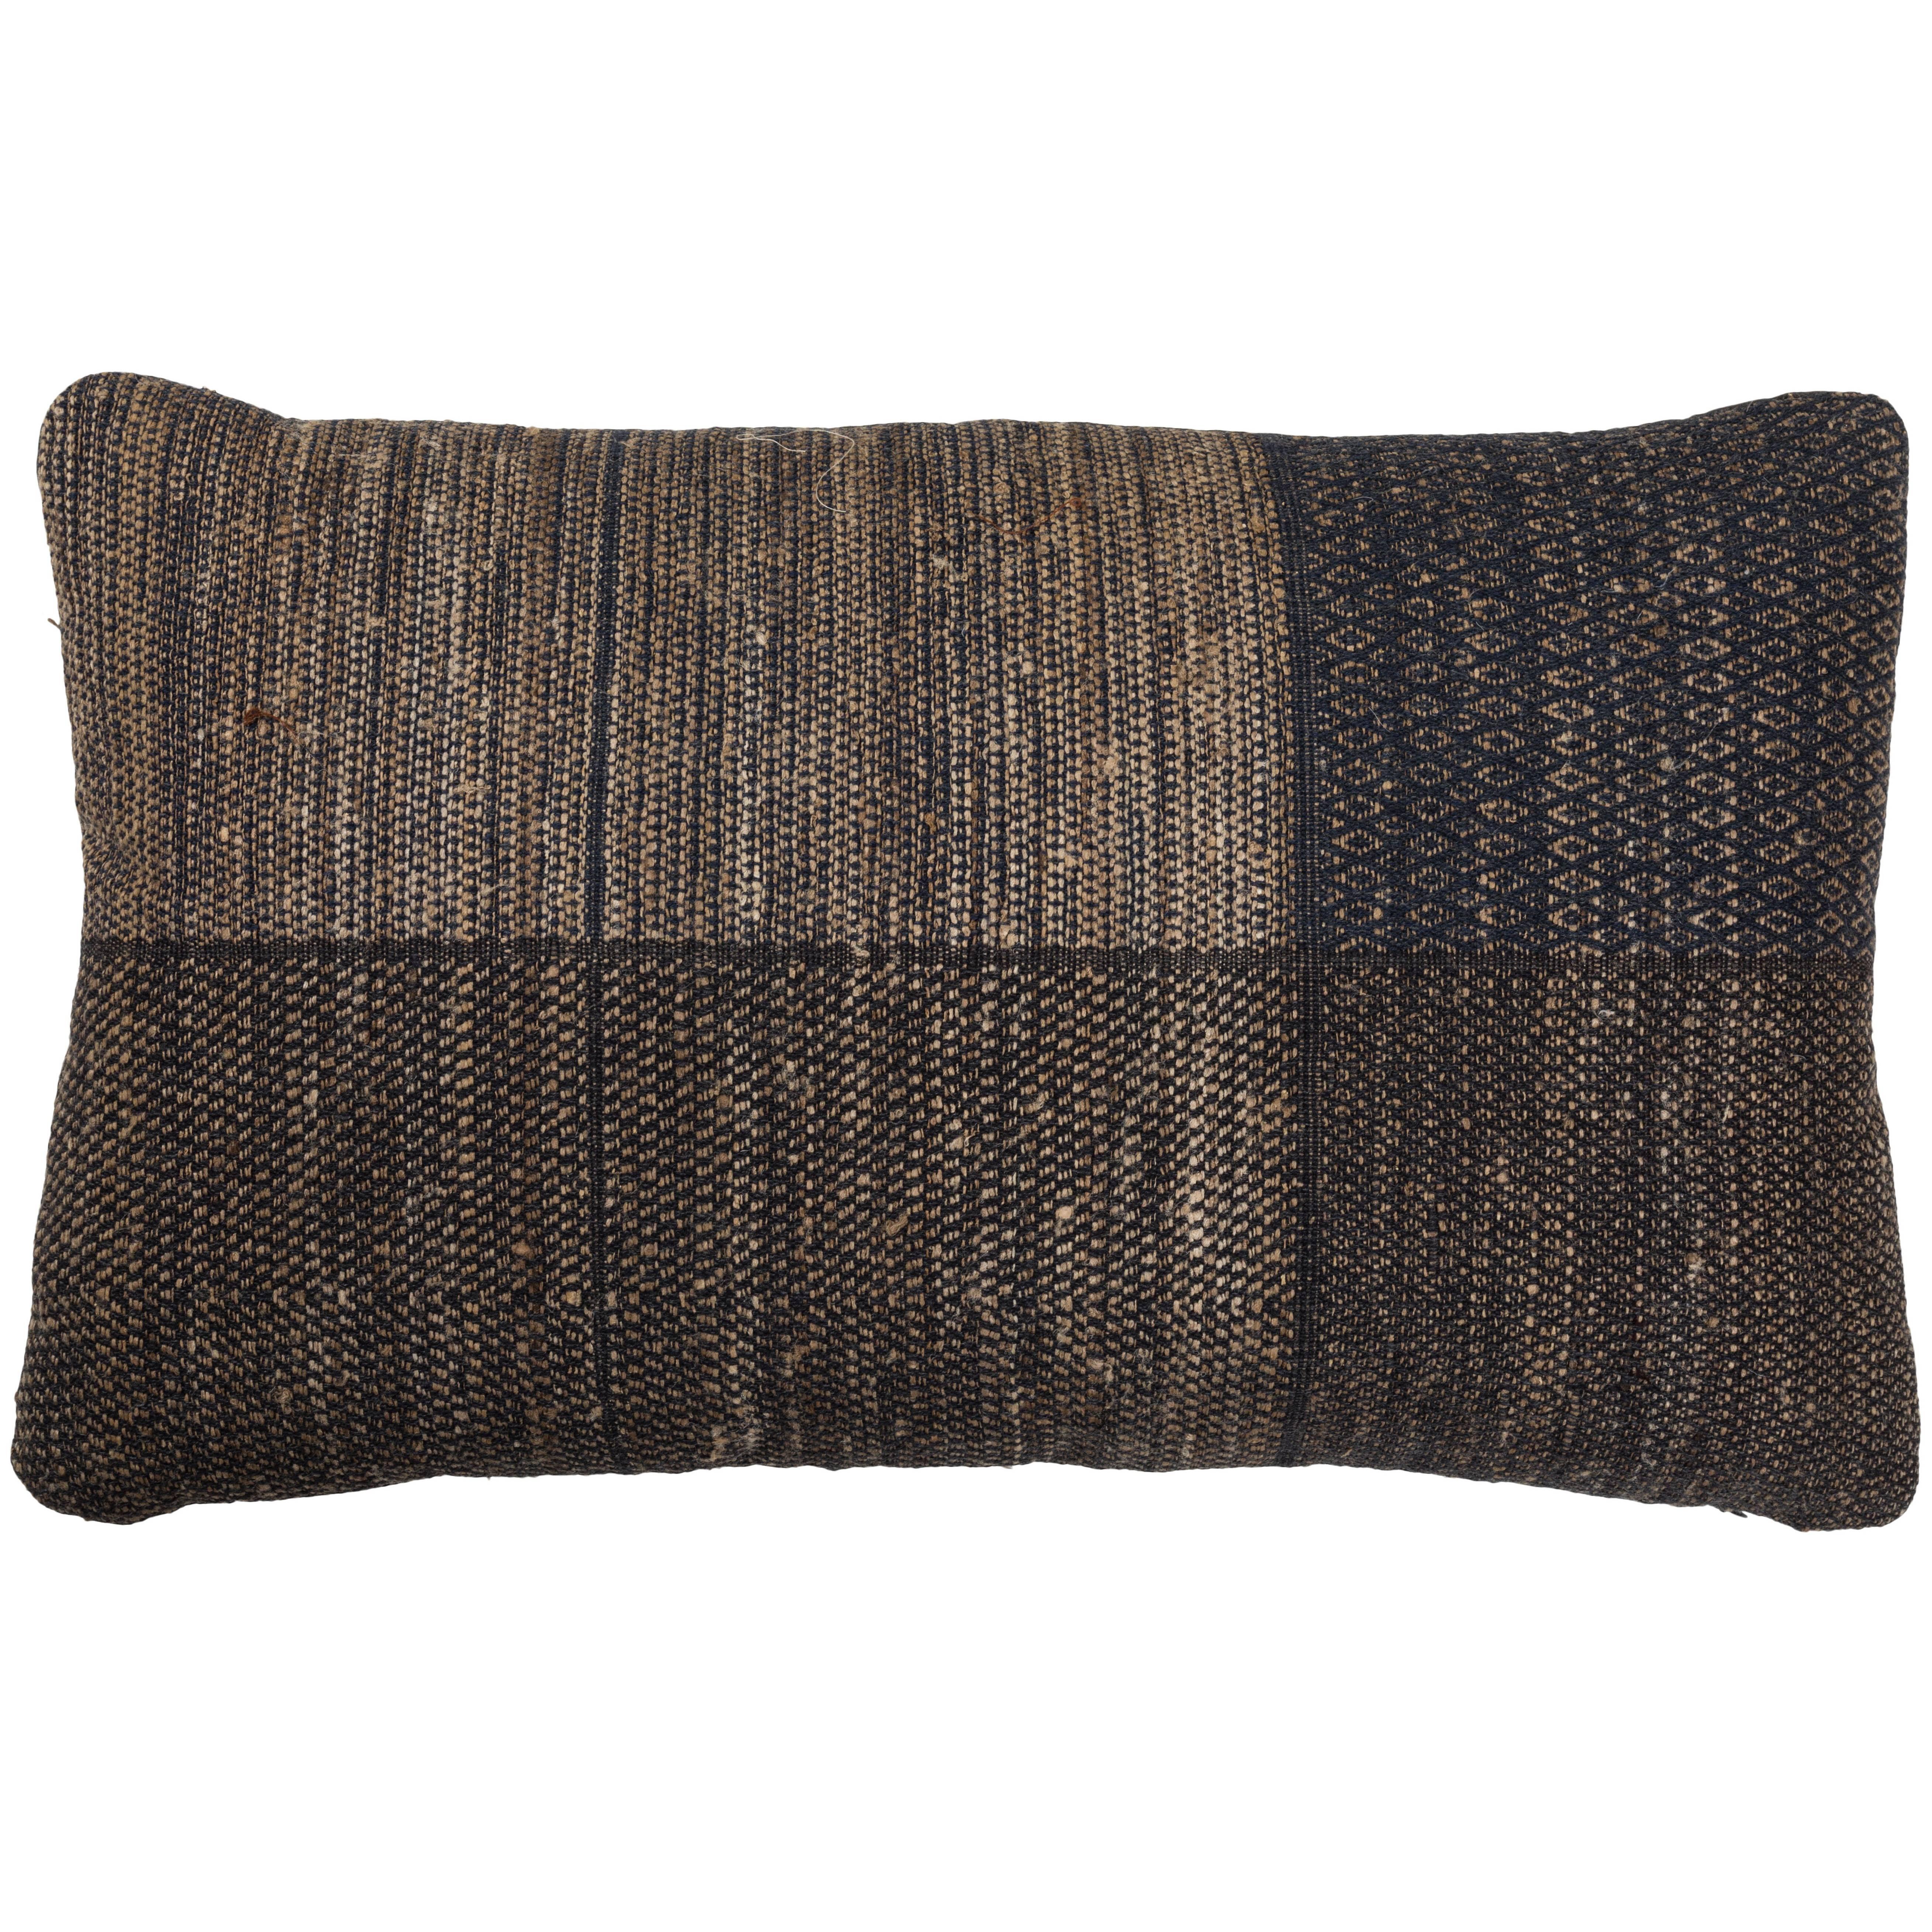 Indian Handwoven Pillow Charcoal and Tan For Sale